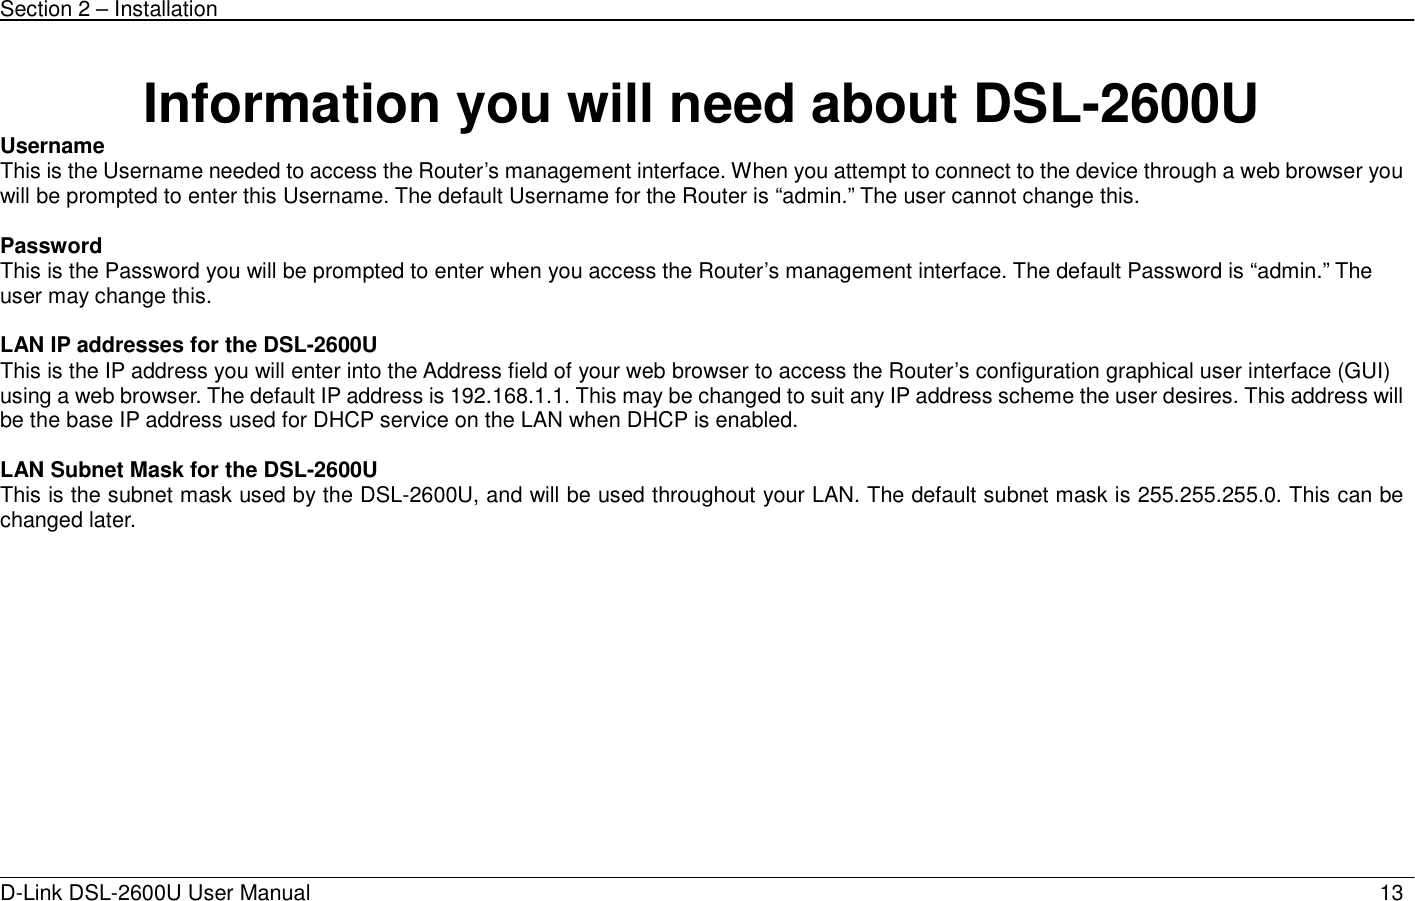 Section 2 – Installation   D-Link DSL-2600U User Manual                            13 Information you will need about DSL-2600U   Username  This is the Username needed to access the Router’s management interface. When you attempt to connect to the device through a web browser you will be prompted to enter this Username. The default Username for the Router is “admin.” The user cannot change this.    Password This is the Password you will be prompted to enter when you access the Router’s management interface. The default Password is “admin.” The user may change this.   LAN IP addresses for the DSL-2600U   This is the IP address you will enter into the Address field of your web browser to access the Router’s configuration graphical user interface (GUI) using a web browser. The default IP address is 192.168.1.1. This may be changed to suit any IP address scheme the user desires. This address will be the base IP address used for DHCP service on the LAN when DHCP is enabled.   LAN Subnet Mask for the DSL-2600U   This is the subnet mask used by the DSL-2600U, and will be used throughout your LAN. The default subnet mask is 255.255.255.0. This can be changed later.   